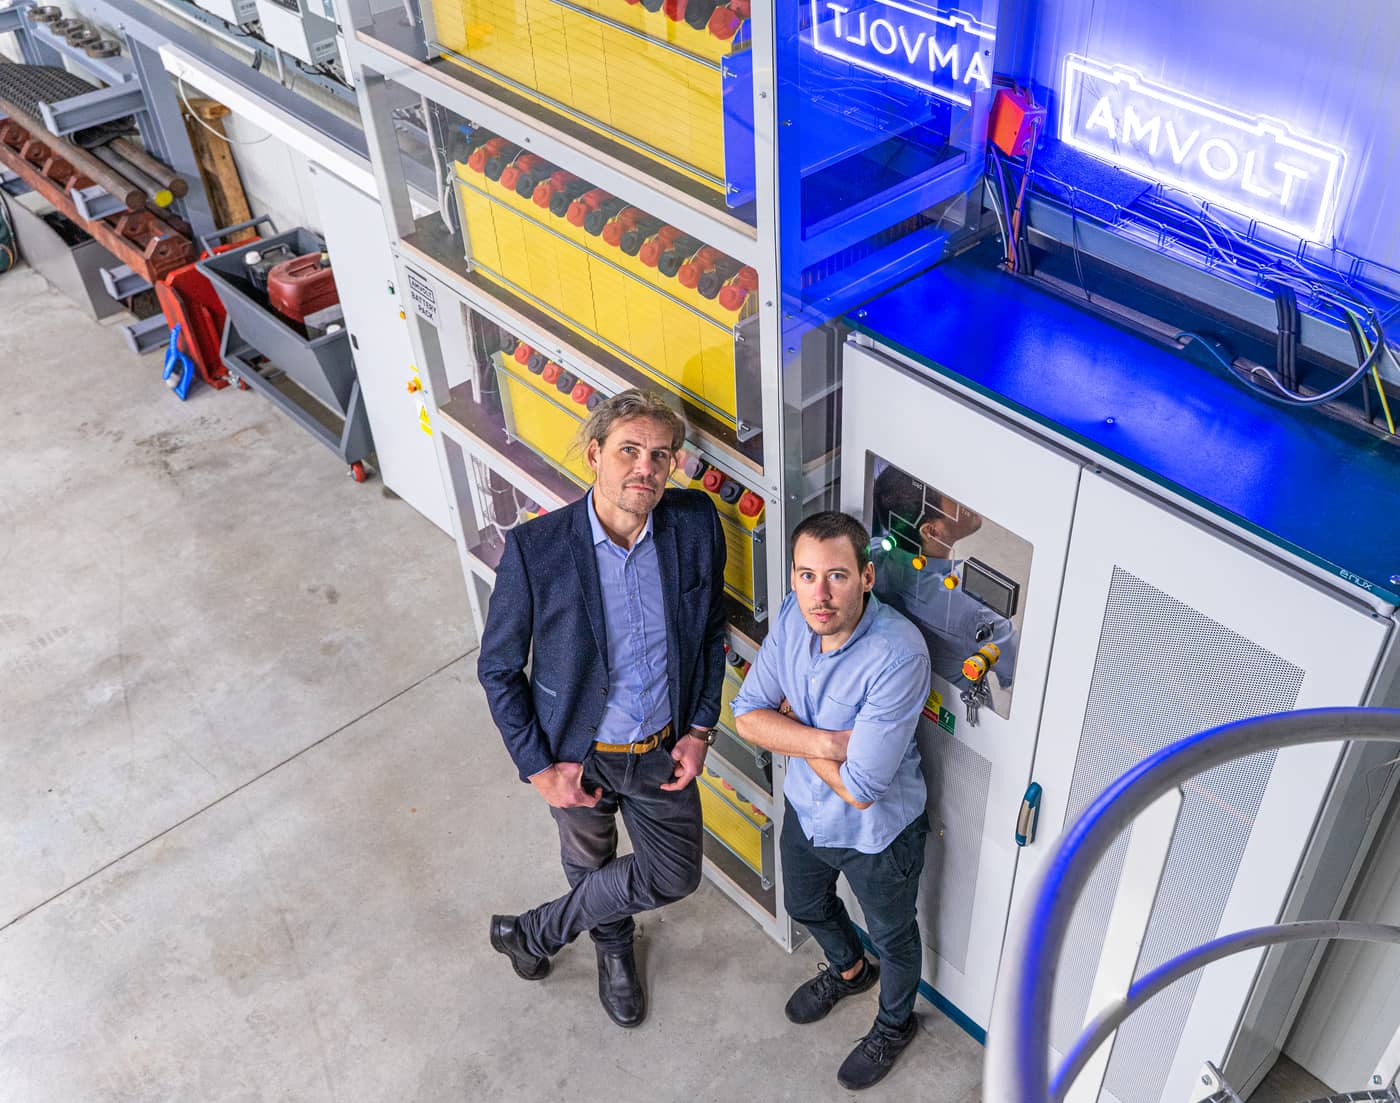 Dependence on China is dangerous, say the founders of the Czech manufacturer of European battery storage AMVOLT